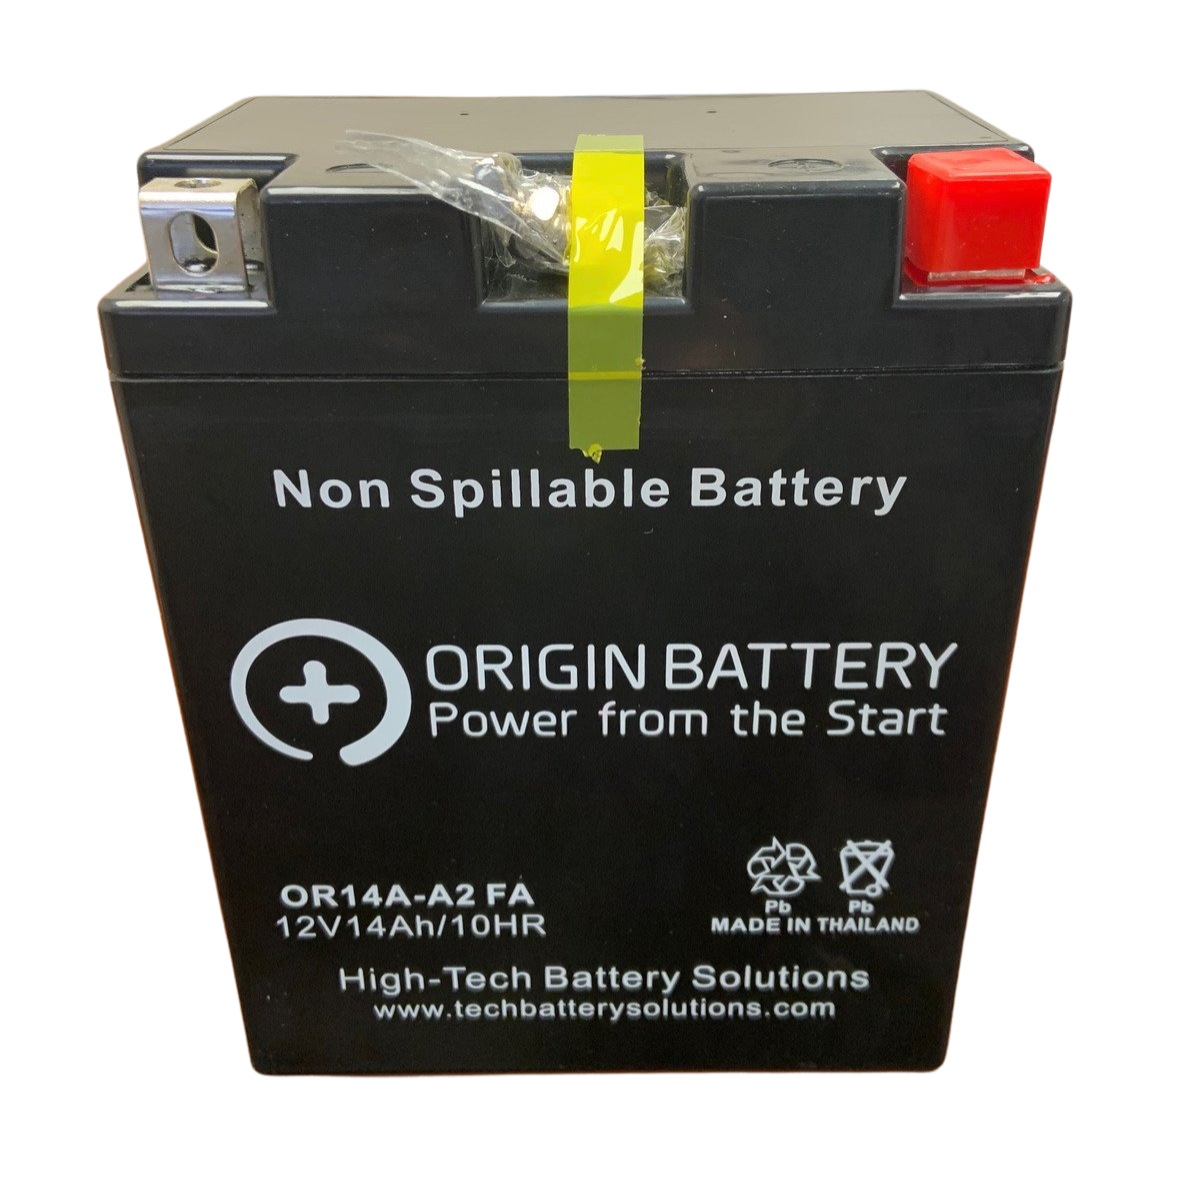 Do you have in stock battery 0r14l-a2